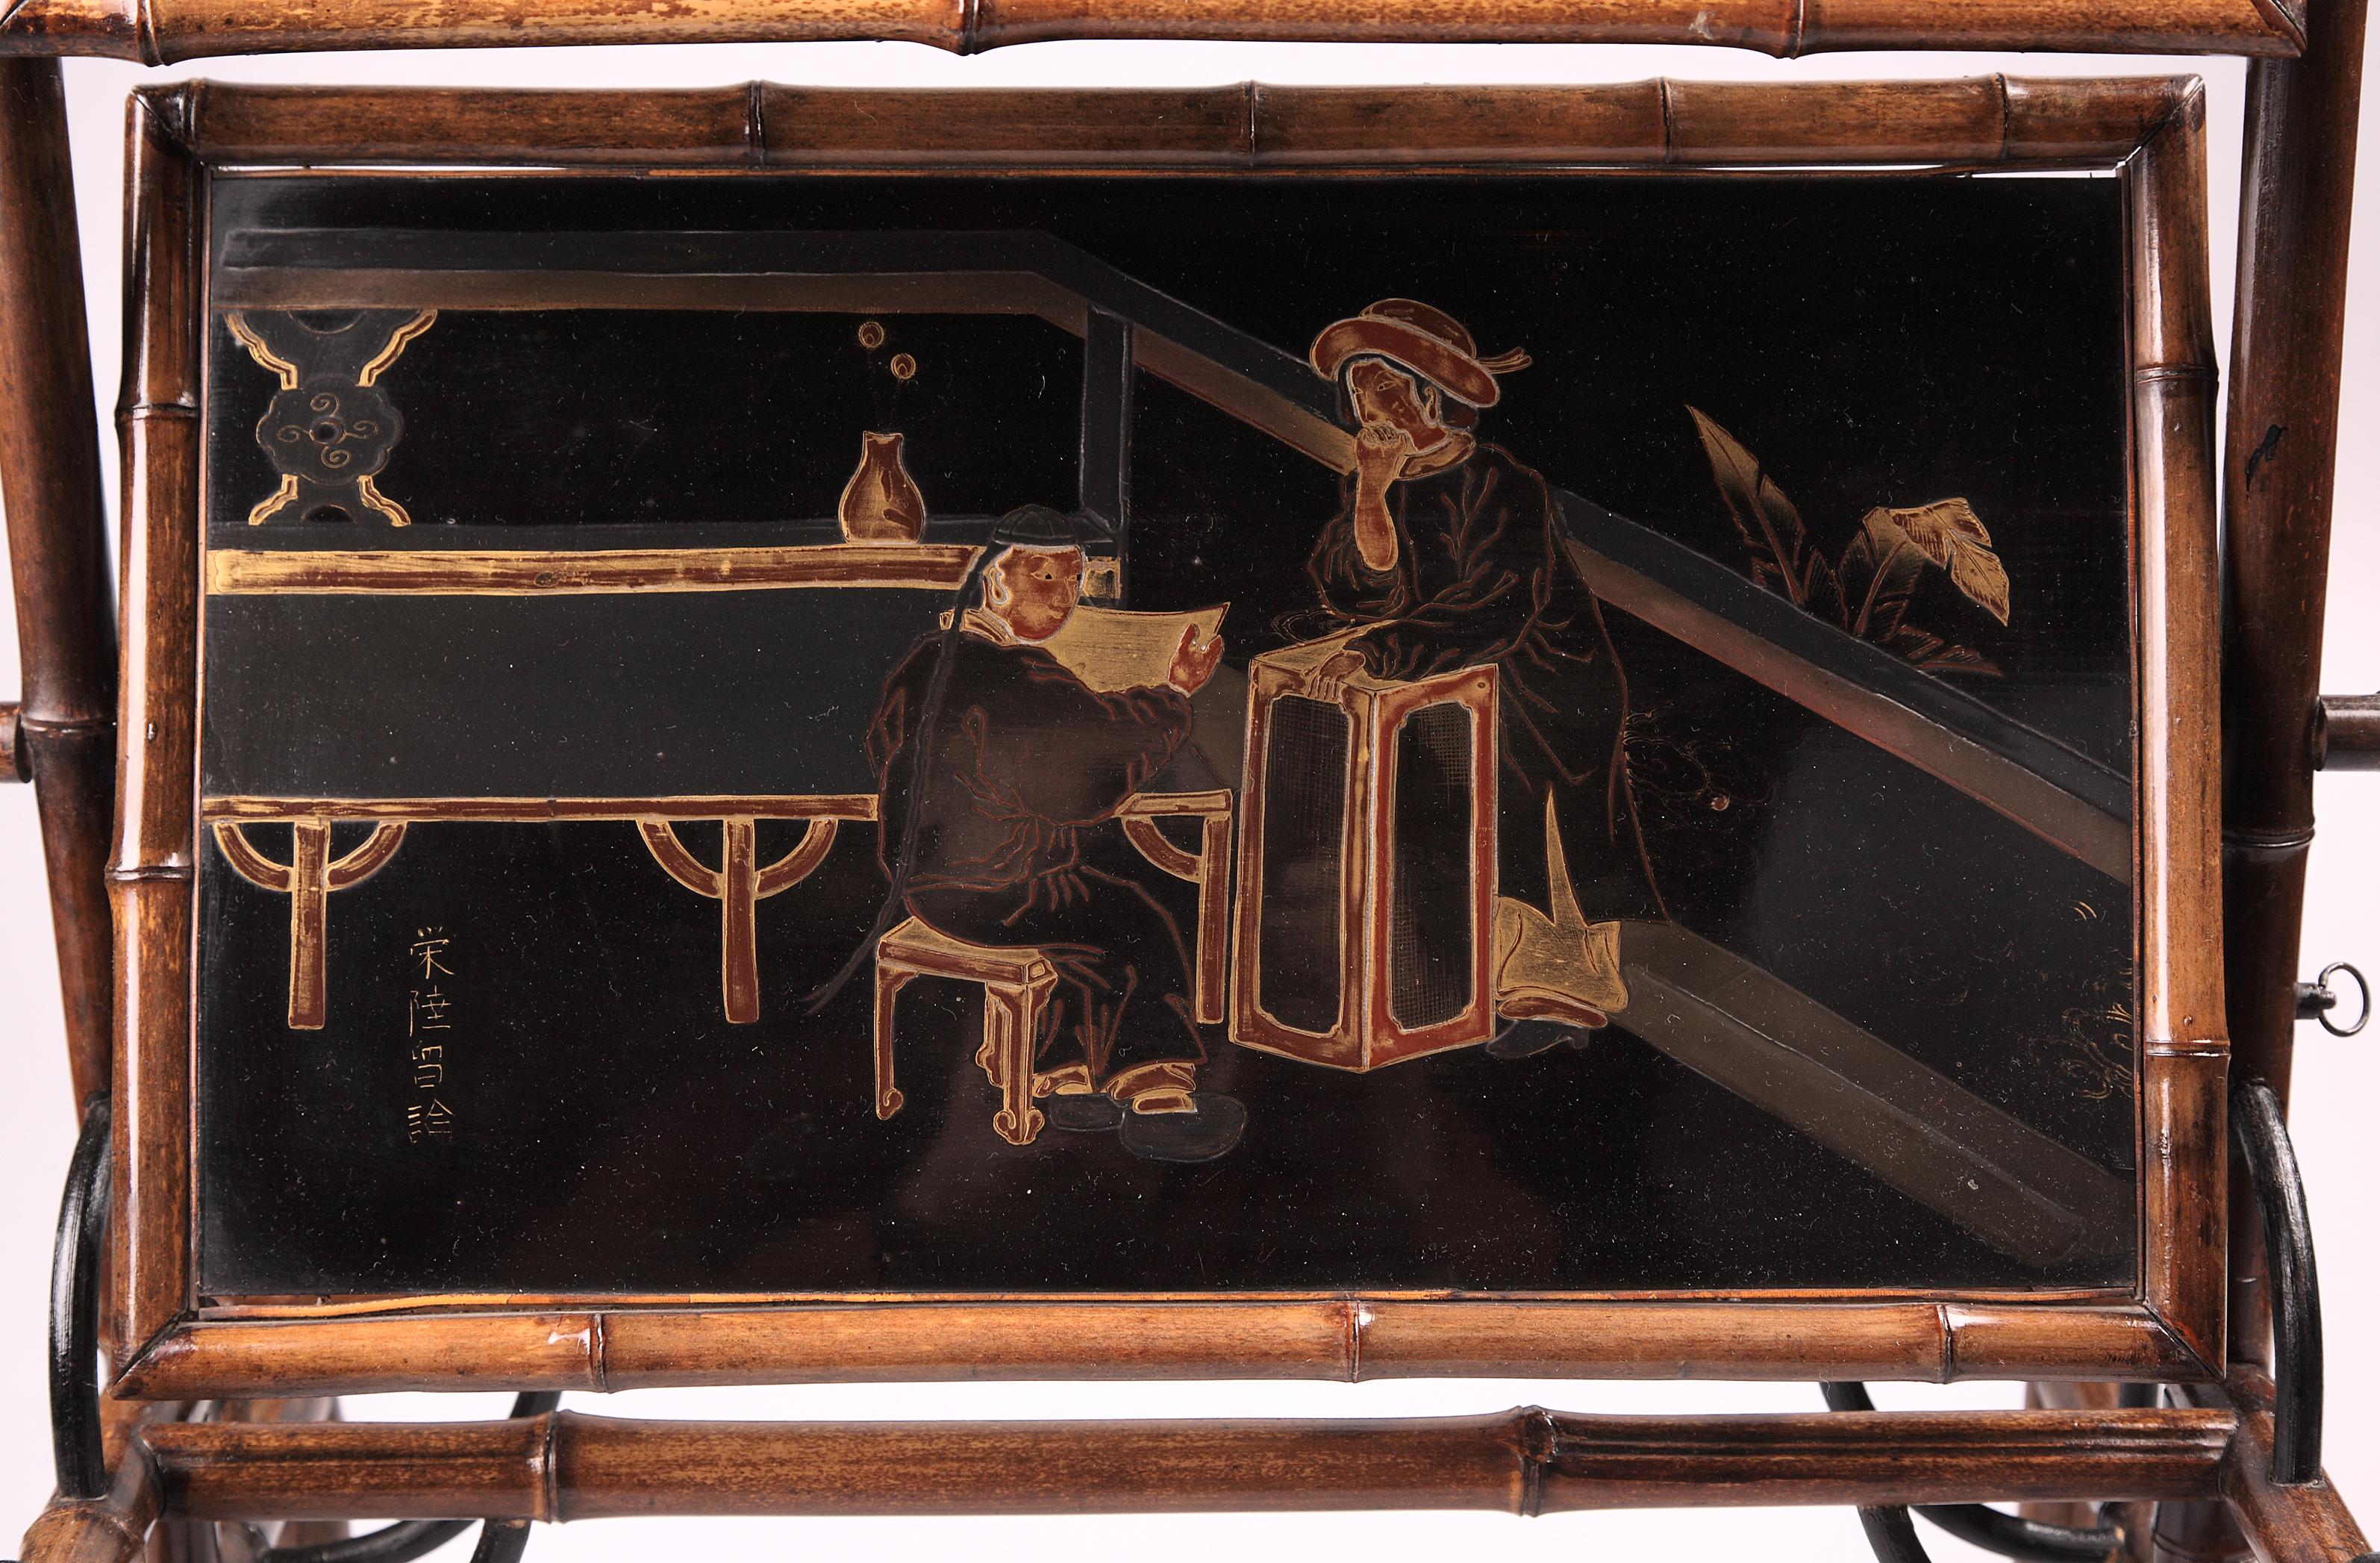 Varnished Japan Lacquer Servant Table Attributed to A. Perret & E. Vibert, France, c. 1880